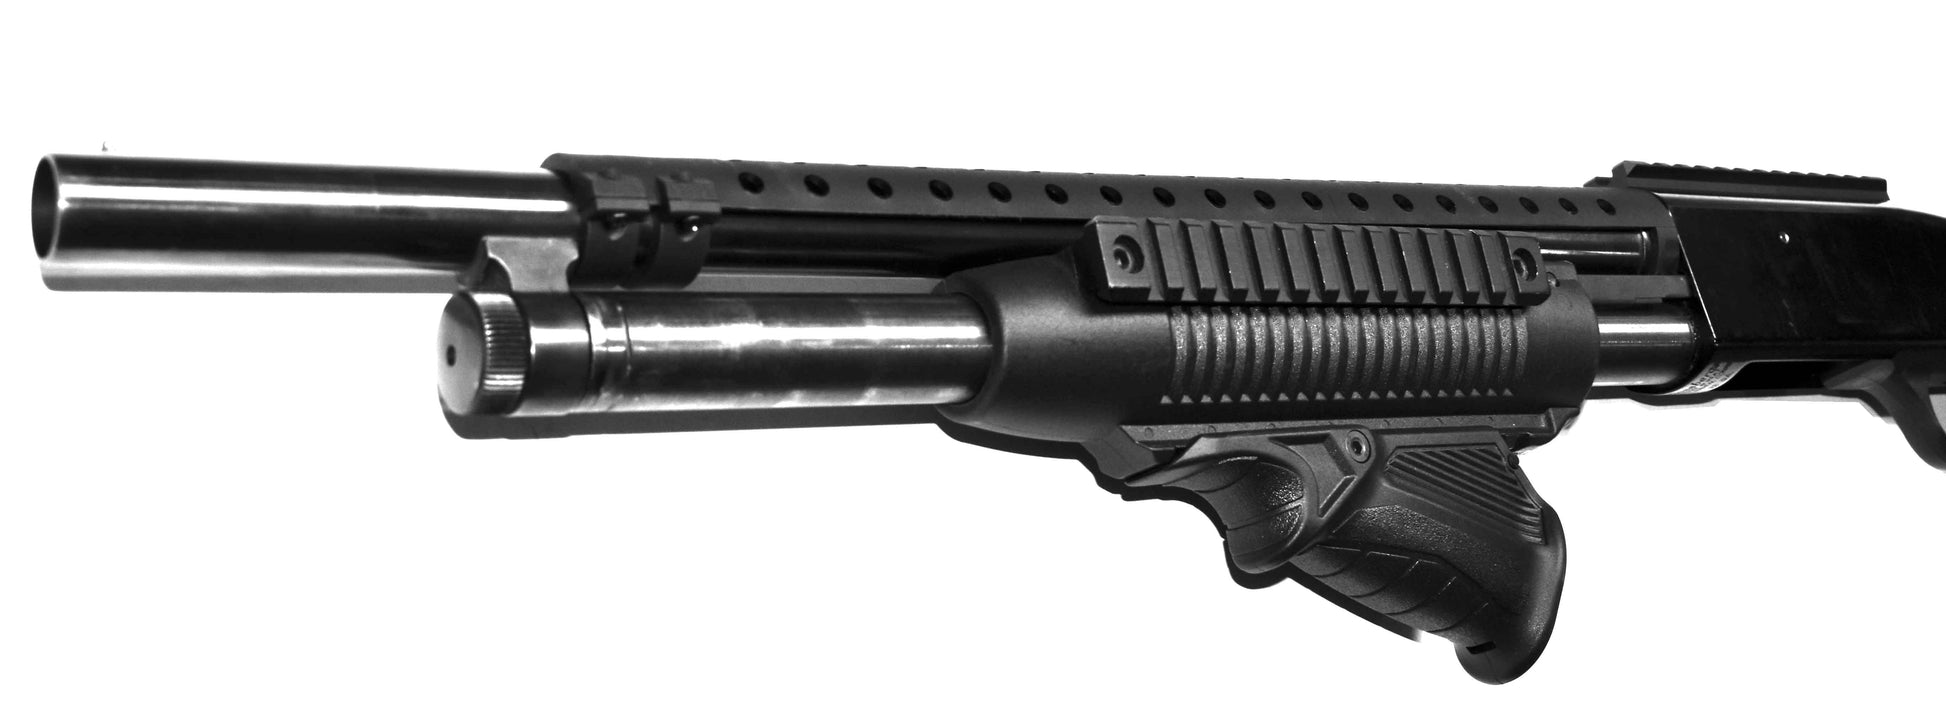 mossberg 500 forend.